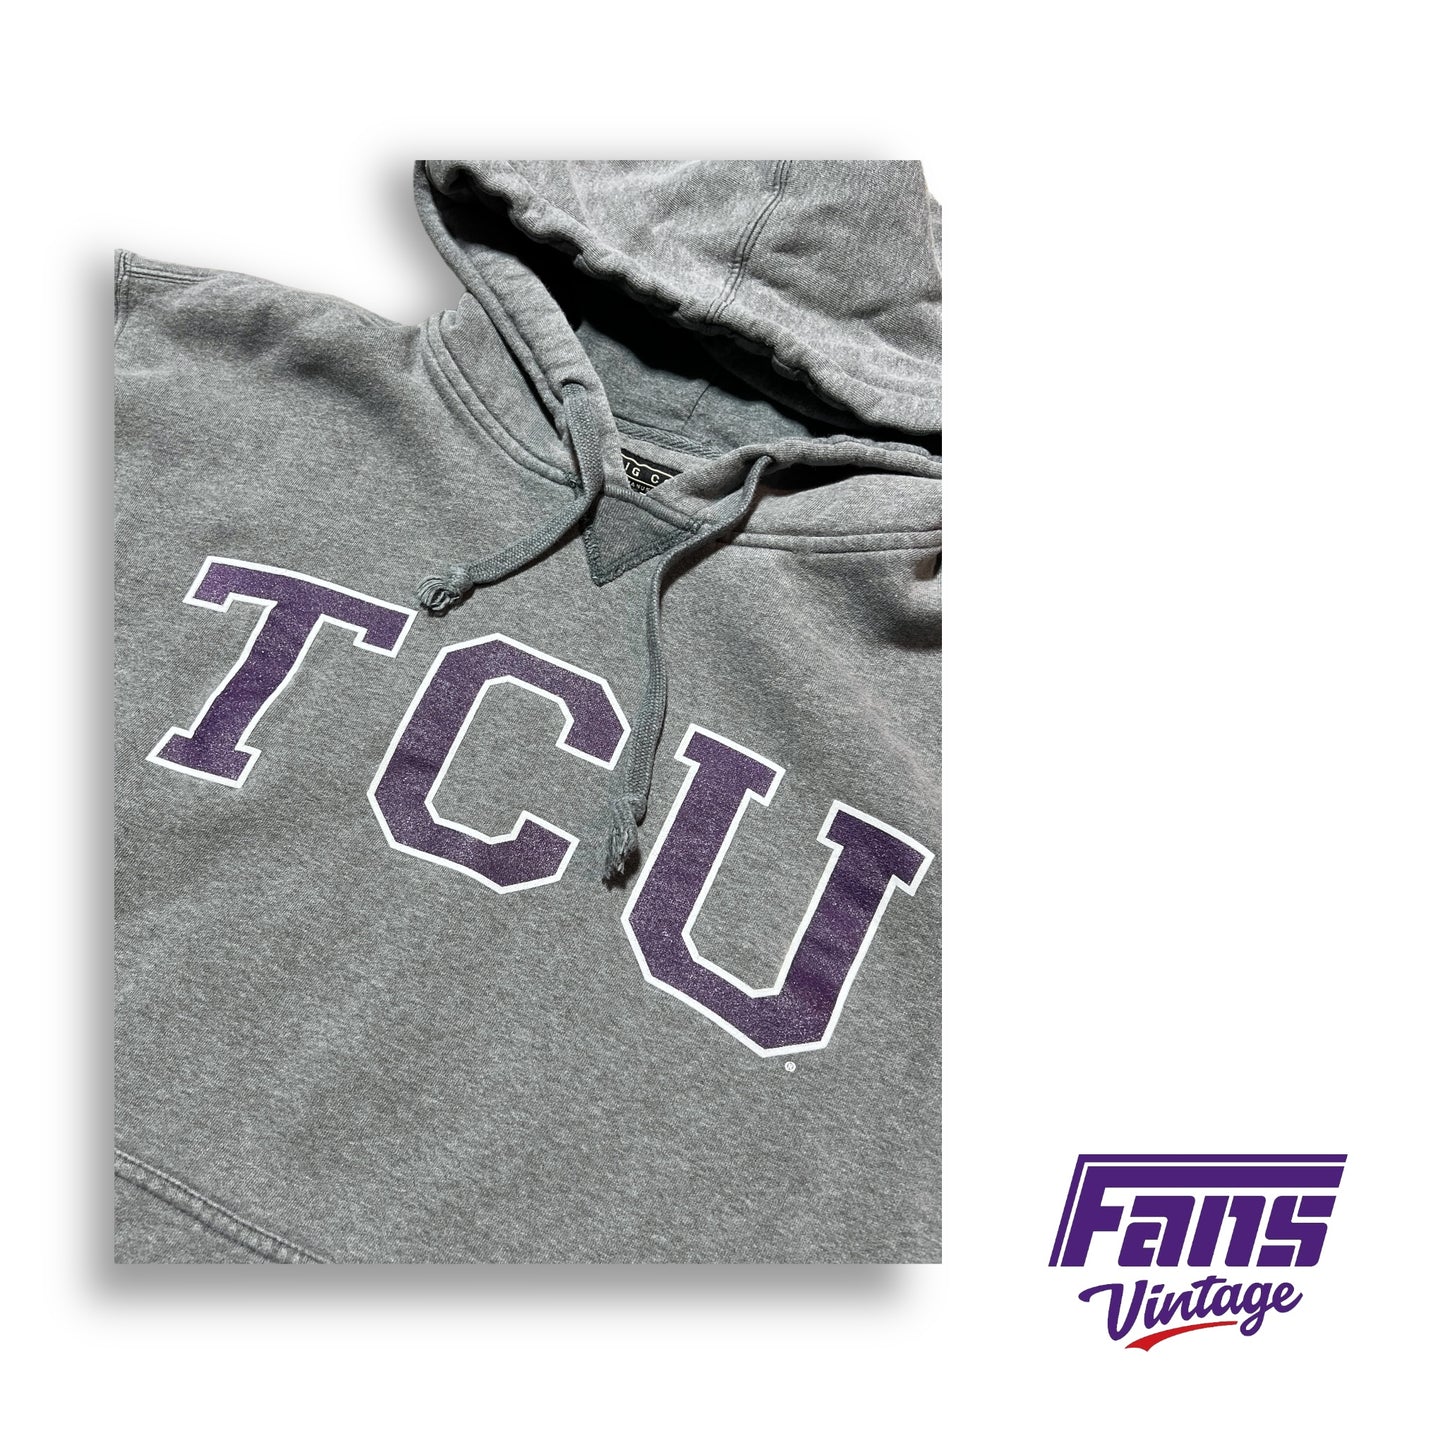 90s Vintage TCU Hoodie - Ultra thick and cozy!